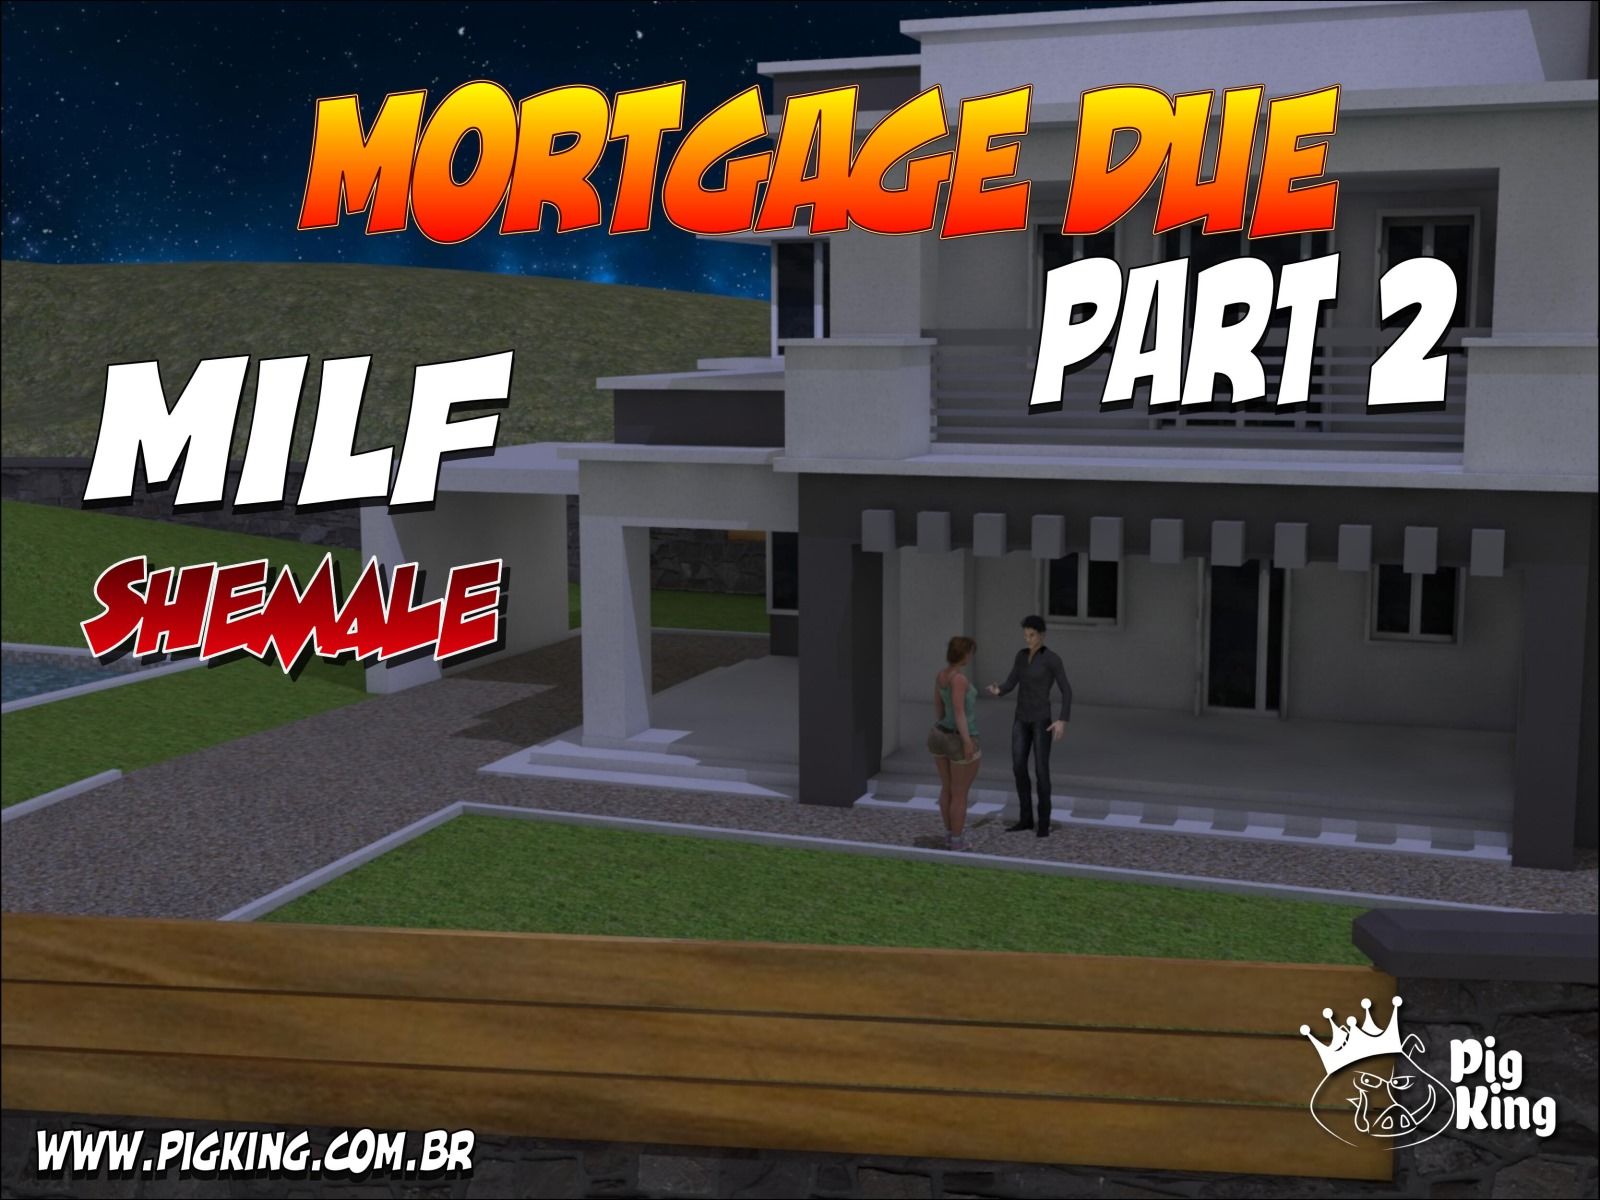 Mortgage Due Milf Pig King page 8